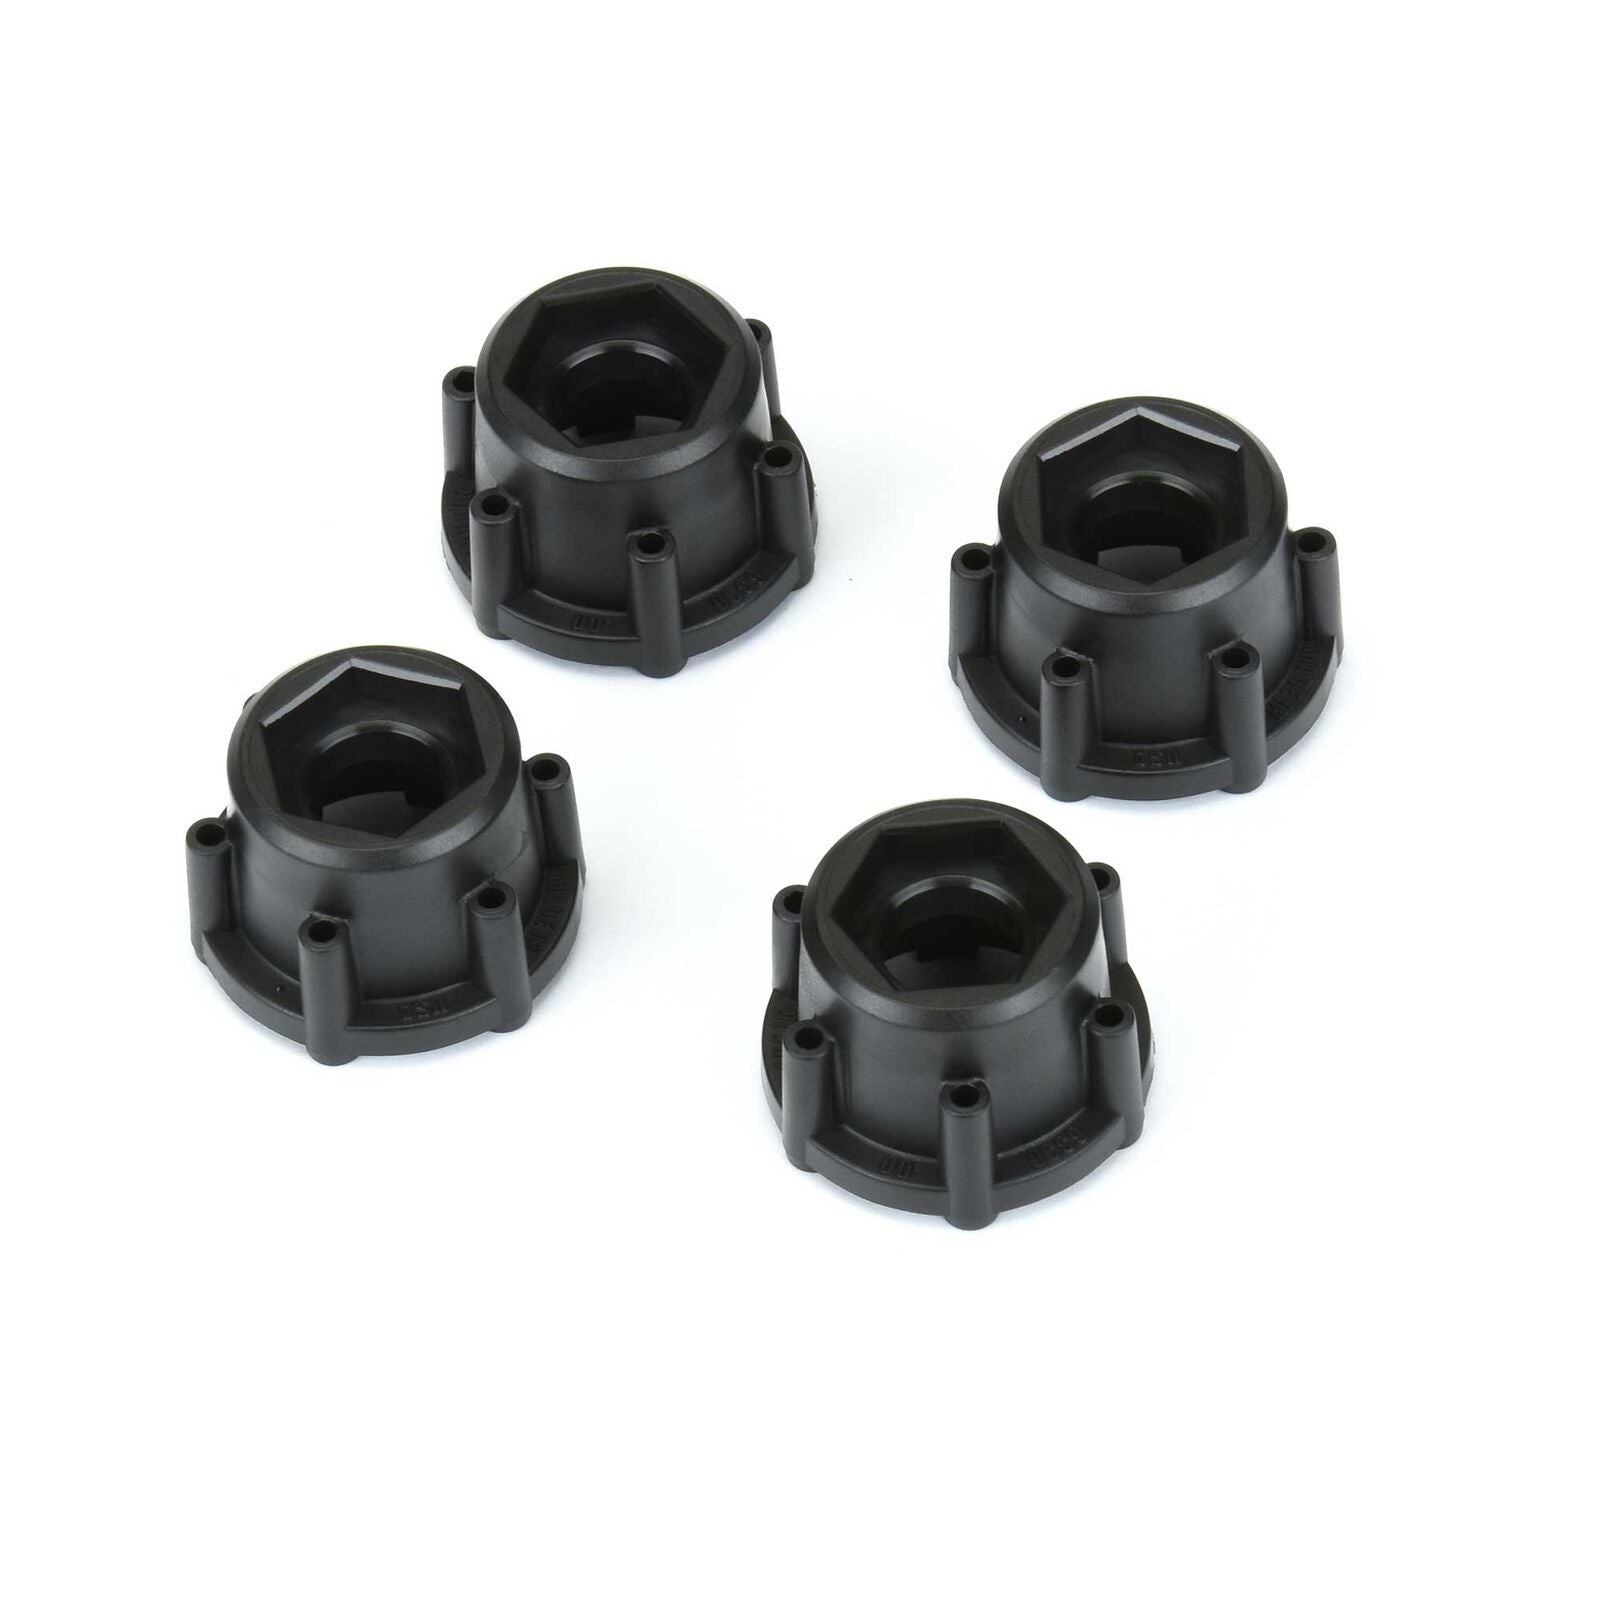 PROLINE 6336-00 1/10 6x30 to 17mm Hex Adapters